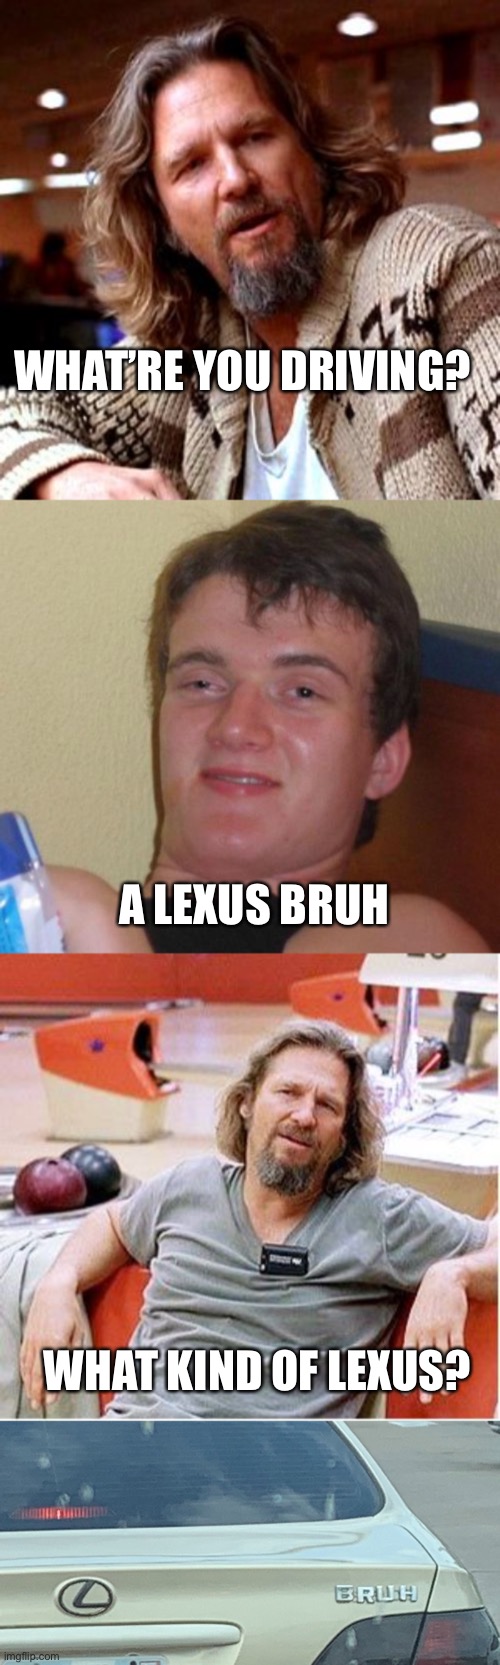 What kind of Lexus, bruh? | WHAT’RE YOU DRIVING? A LEXUS BRUH; WHAT KIND OF LEXUS? | image tagged in memes,confused lebowski,10 guy,big lebowski,lexus,bruh | made w/ Imgflip meme maker